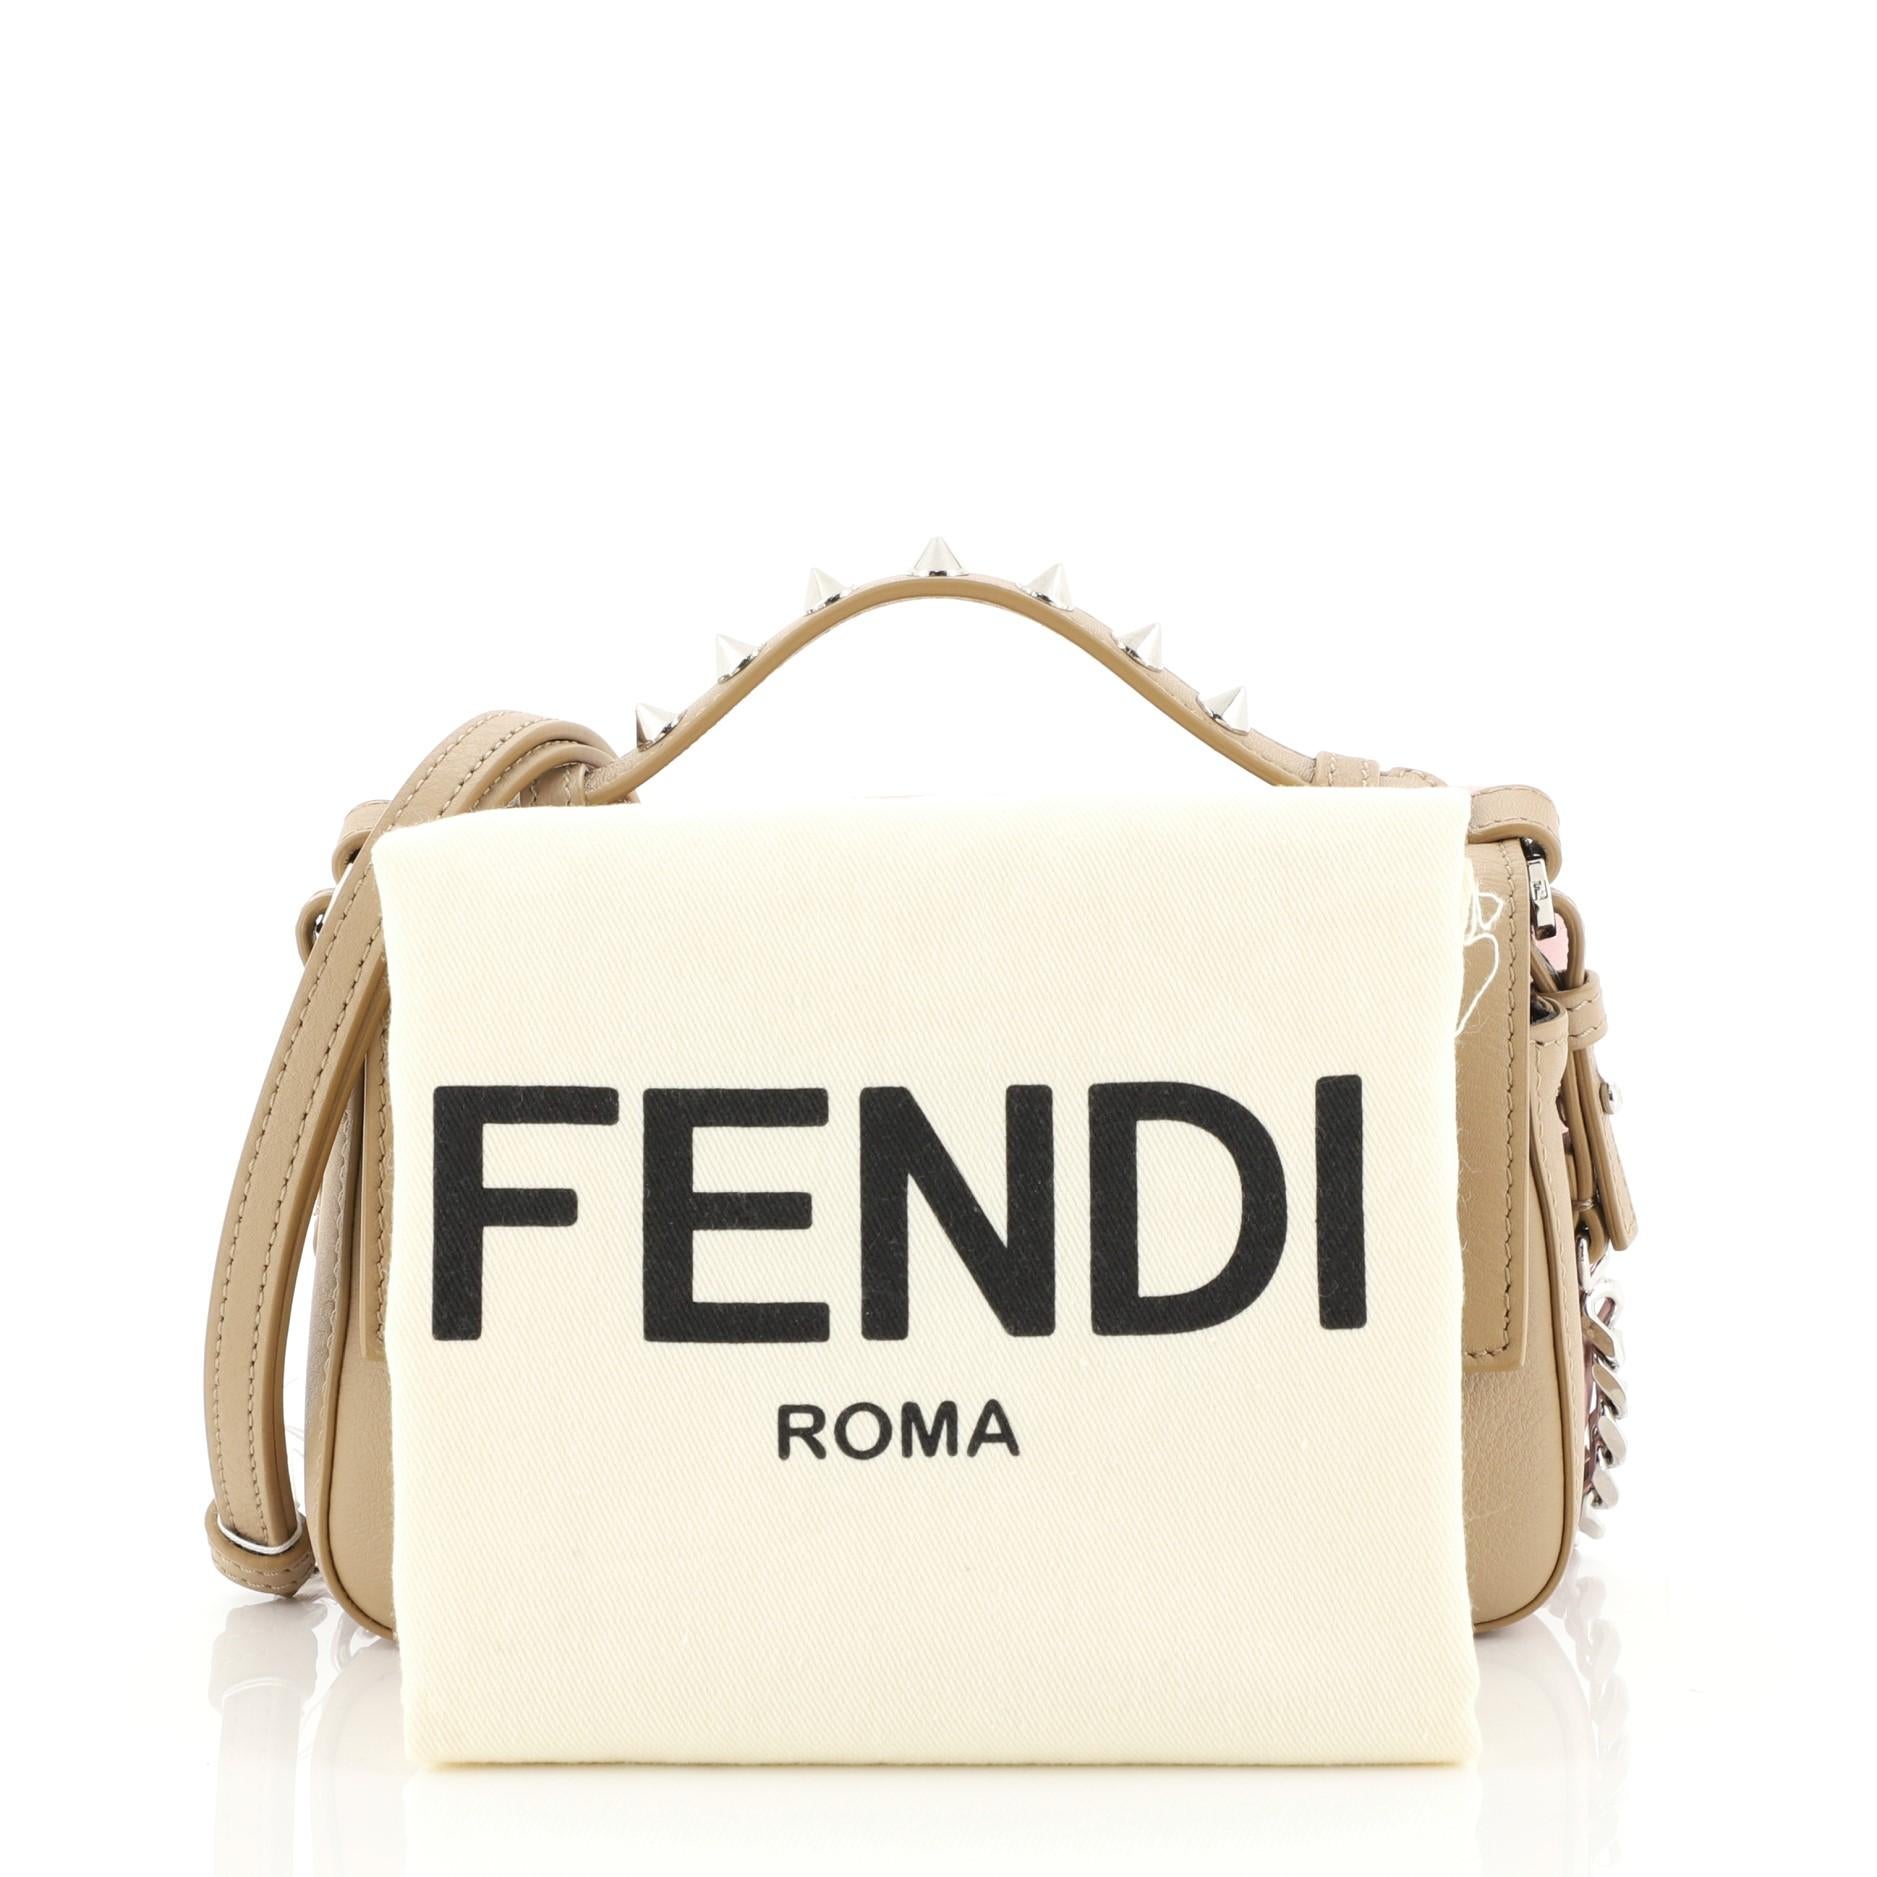 This Fendi Hypnoteyes Double Baguette Crossbody Bag Leather Micro, crafted from brown, pink and multicolor leather, features spiked leather handle, chain link strap with leather pad, distinctive ‘Hypnoteyes’ embellishment on the front, and